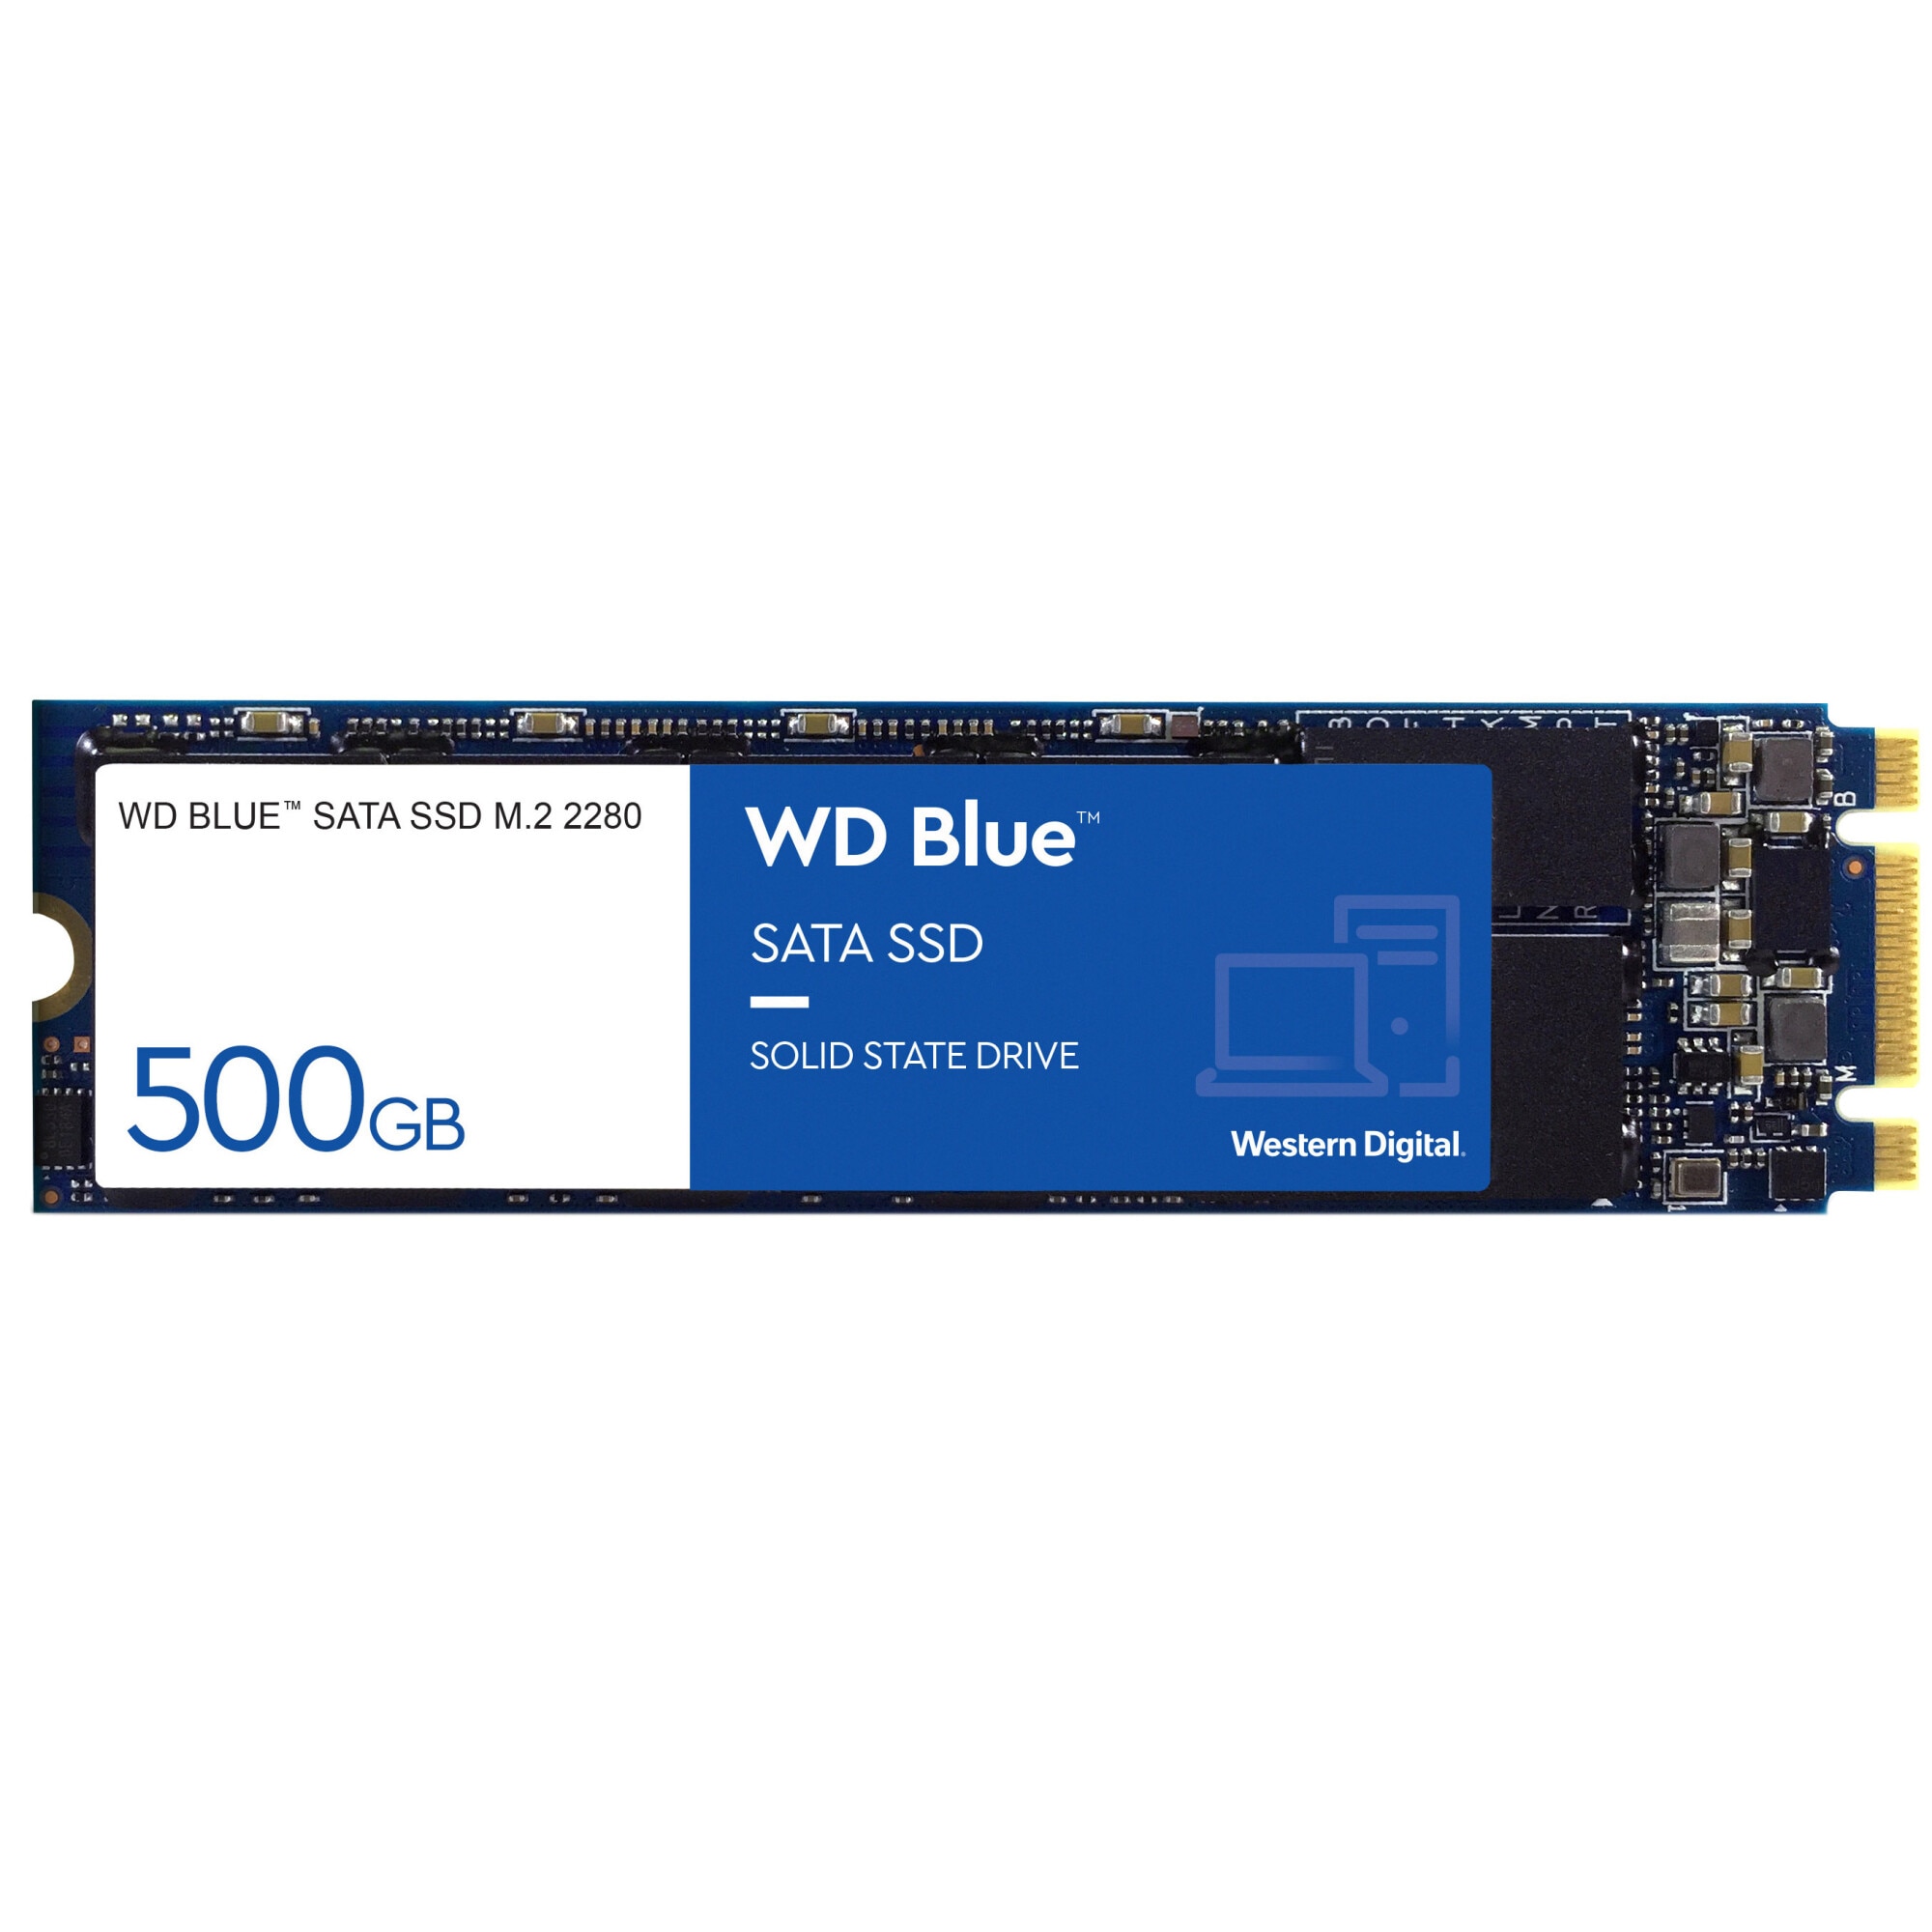 sheep hill Usually Solid State Drive (SSD) WD Blue™, 500GB, SATA III, M.2 2280 - eMAG.ro